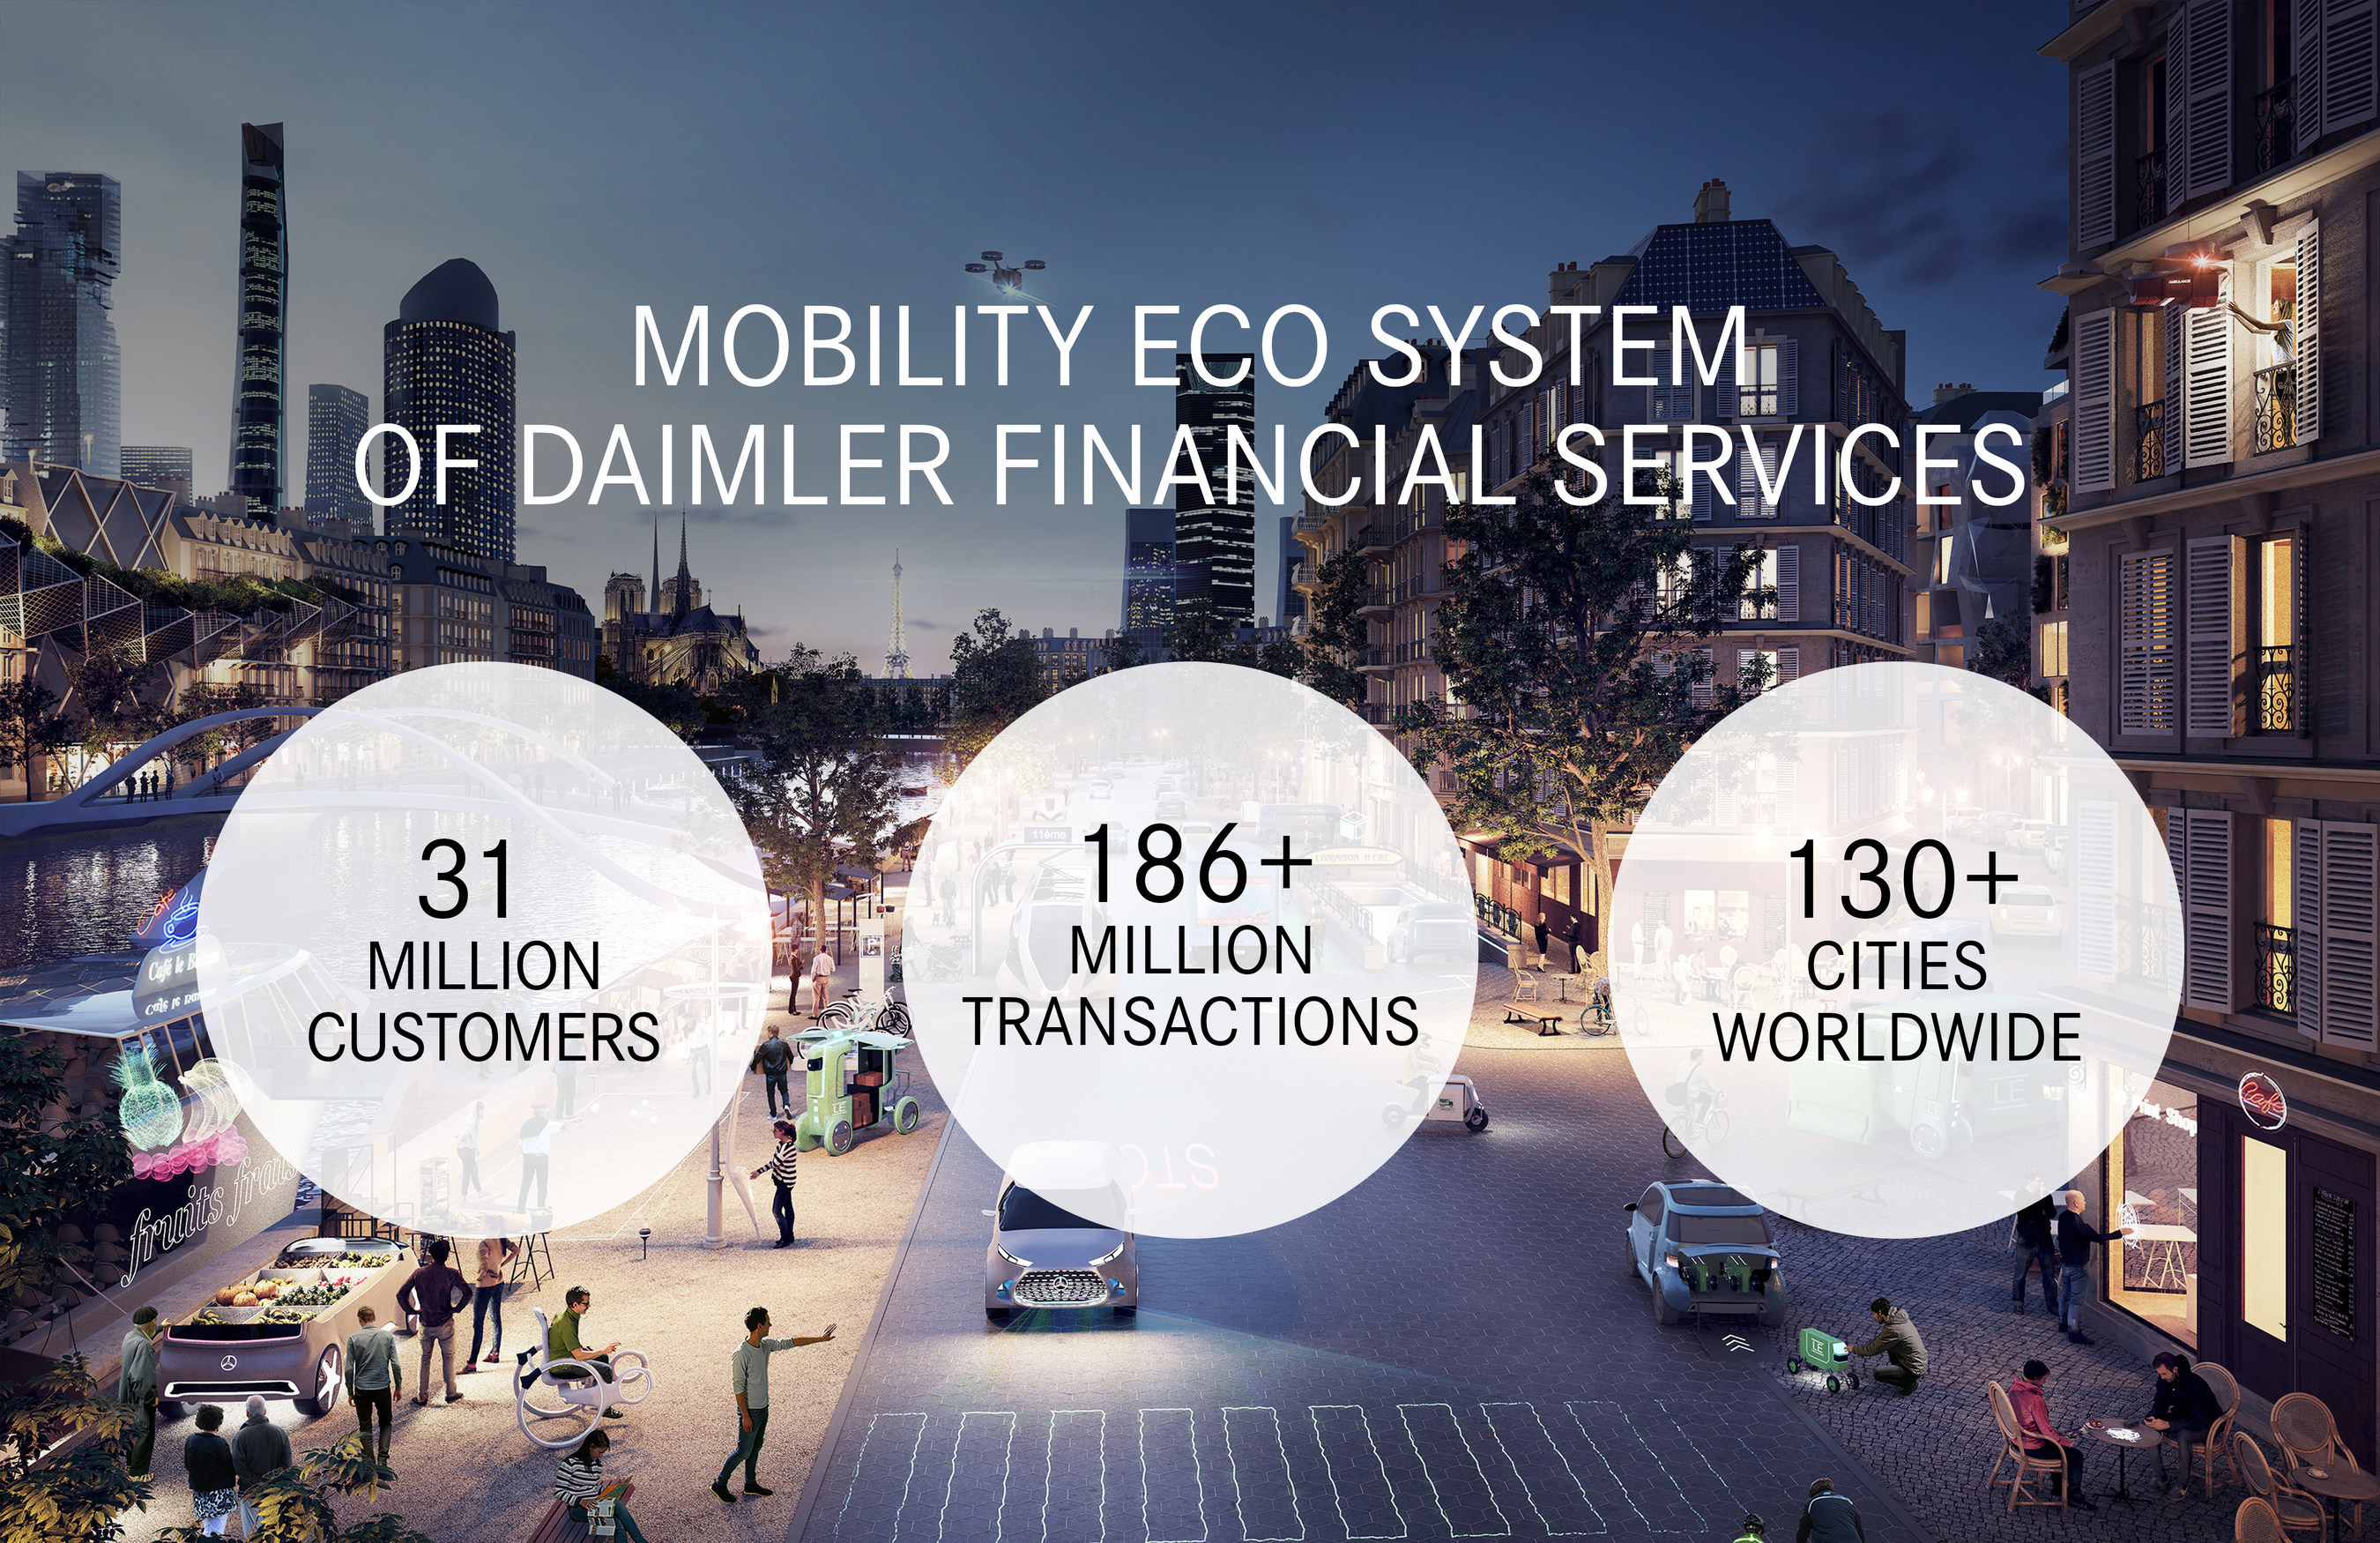 Daimler Financial Services Continues To Trail Blaze Mobility On Demand For Global Consumers And Smart Cities